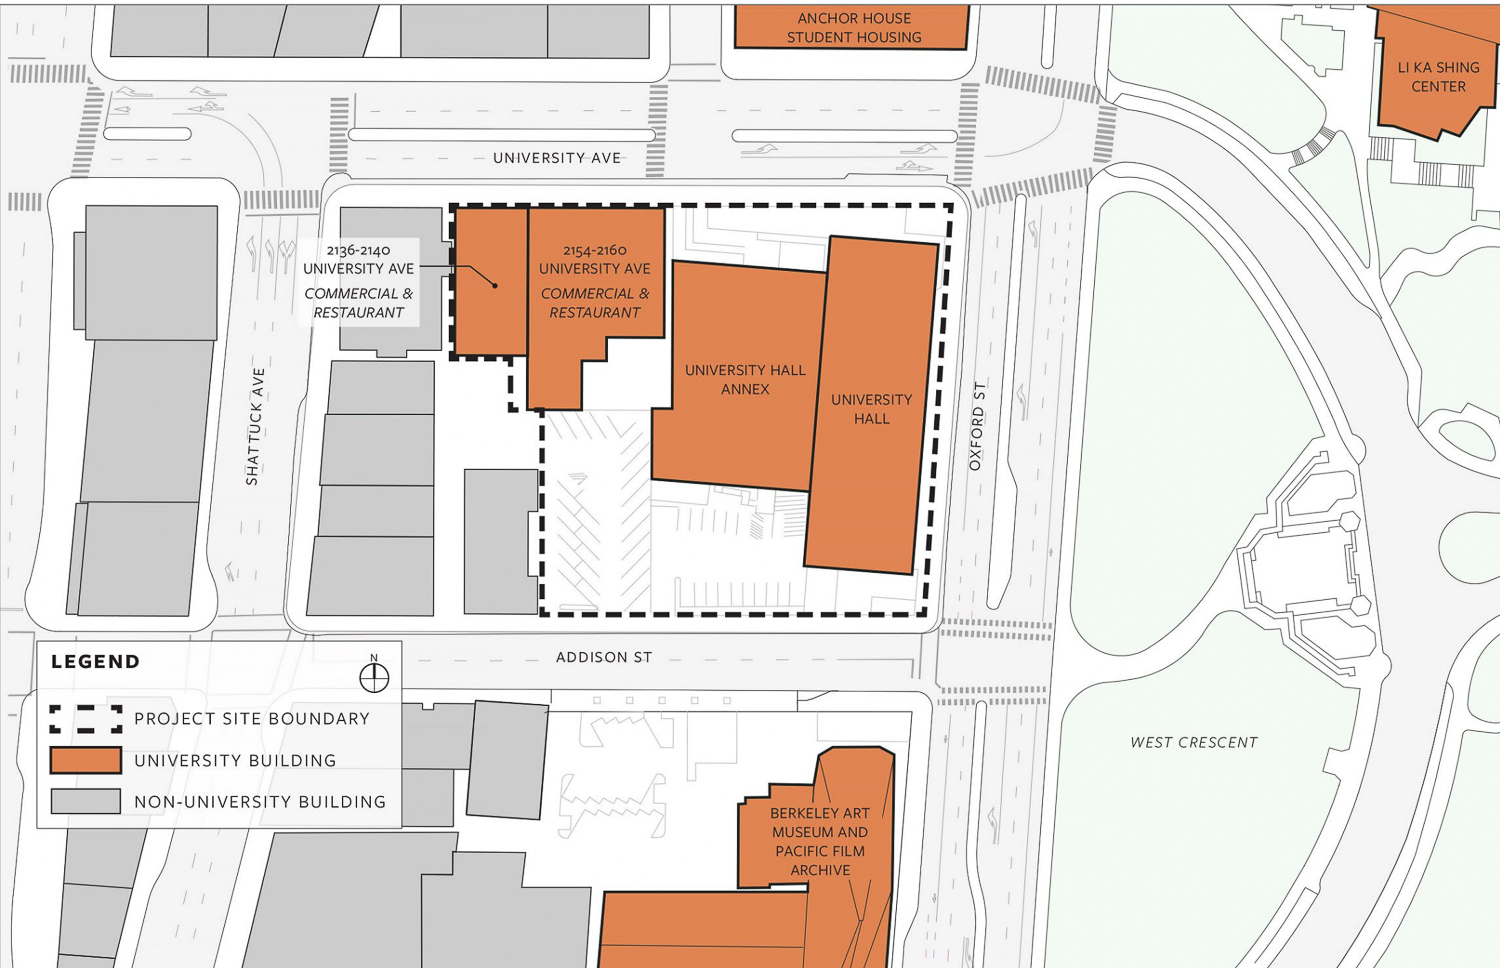 UC Berkeley Innovation Zone existing condition, site map by the EIR author, Ascent